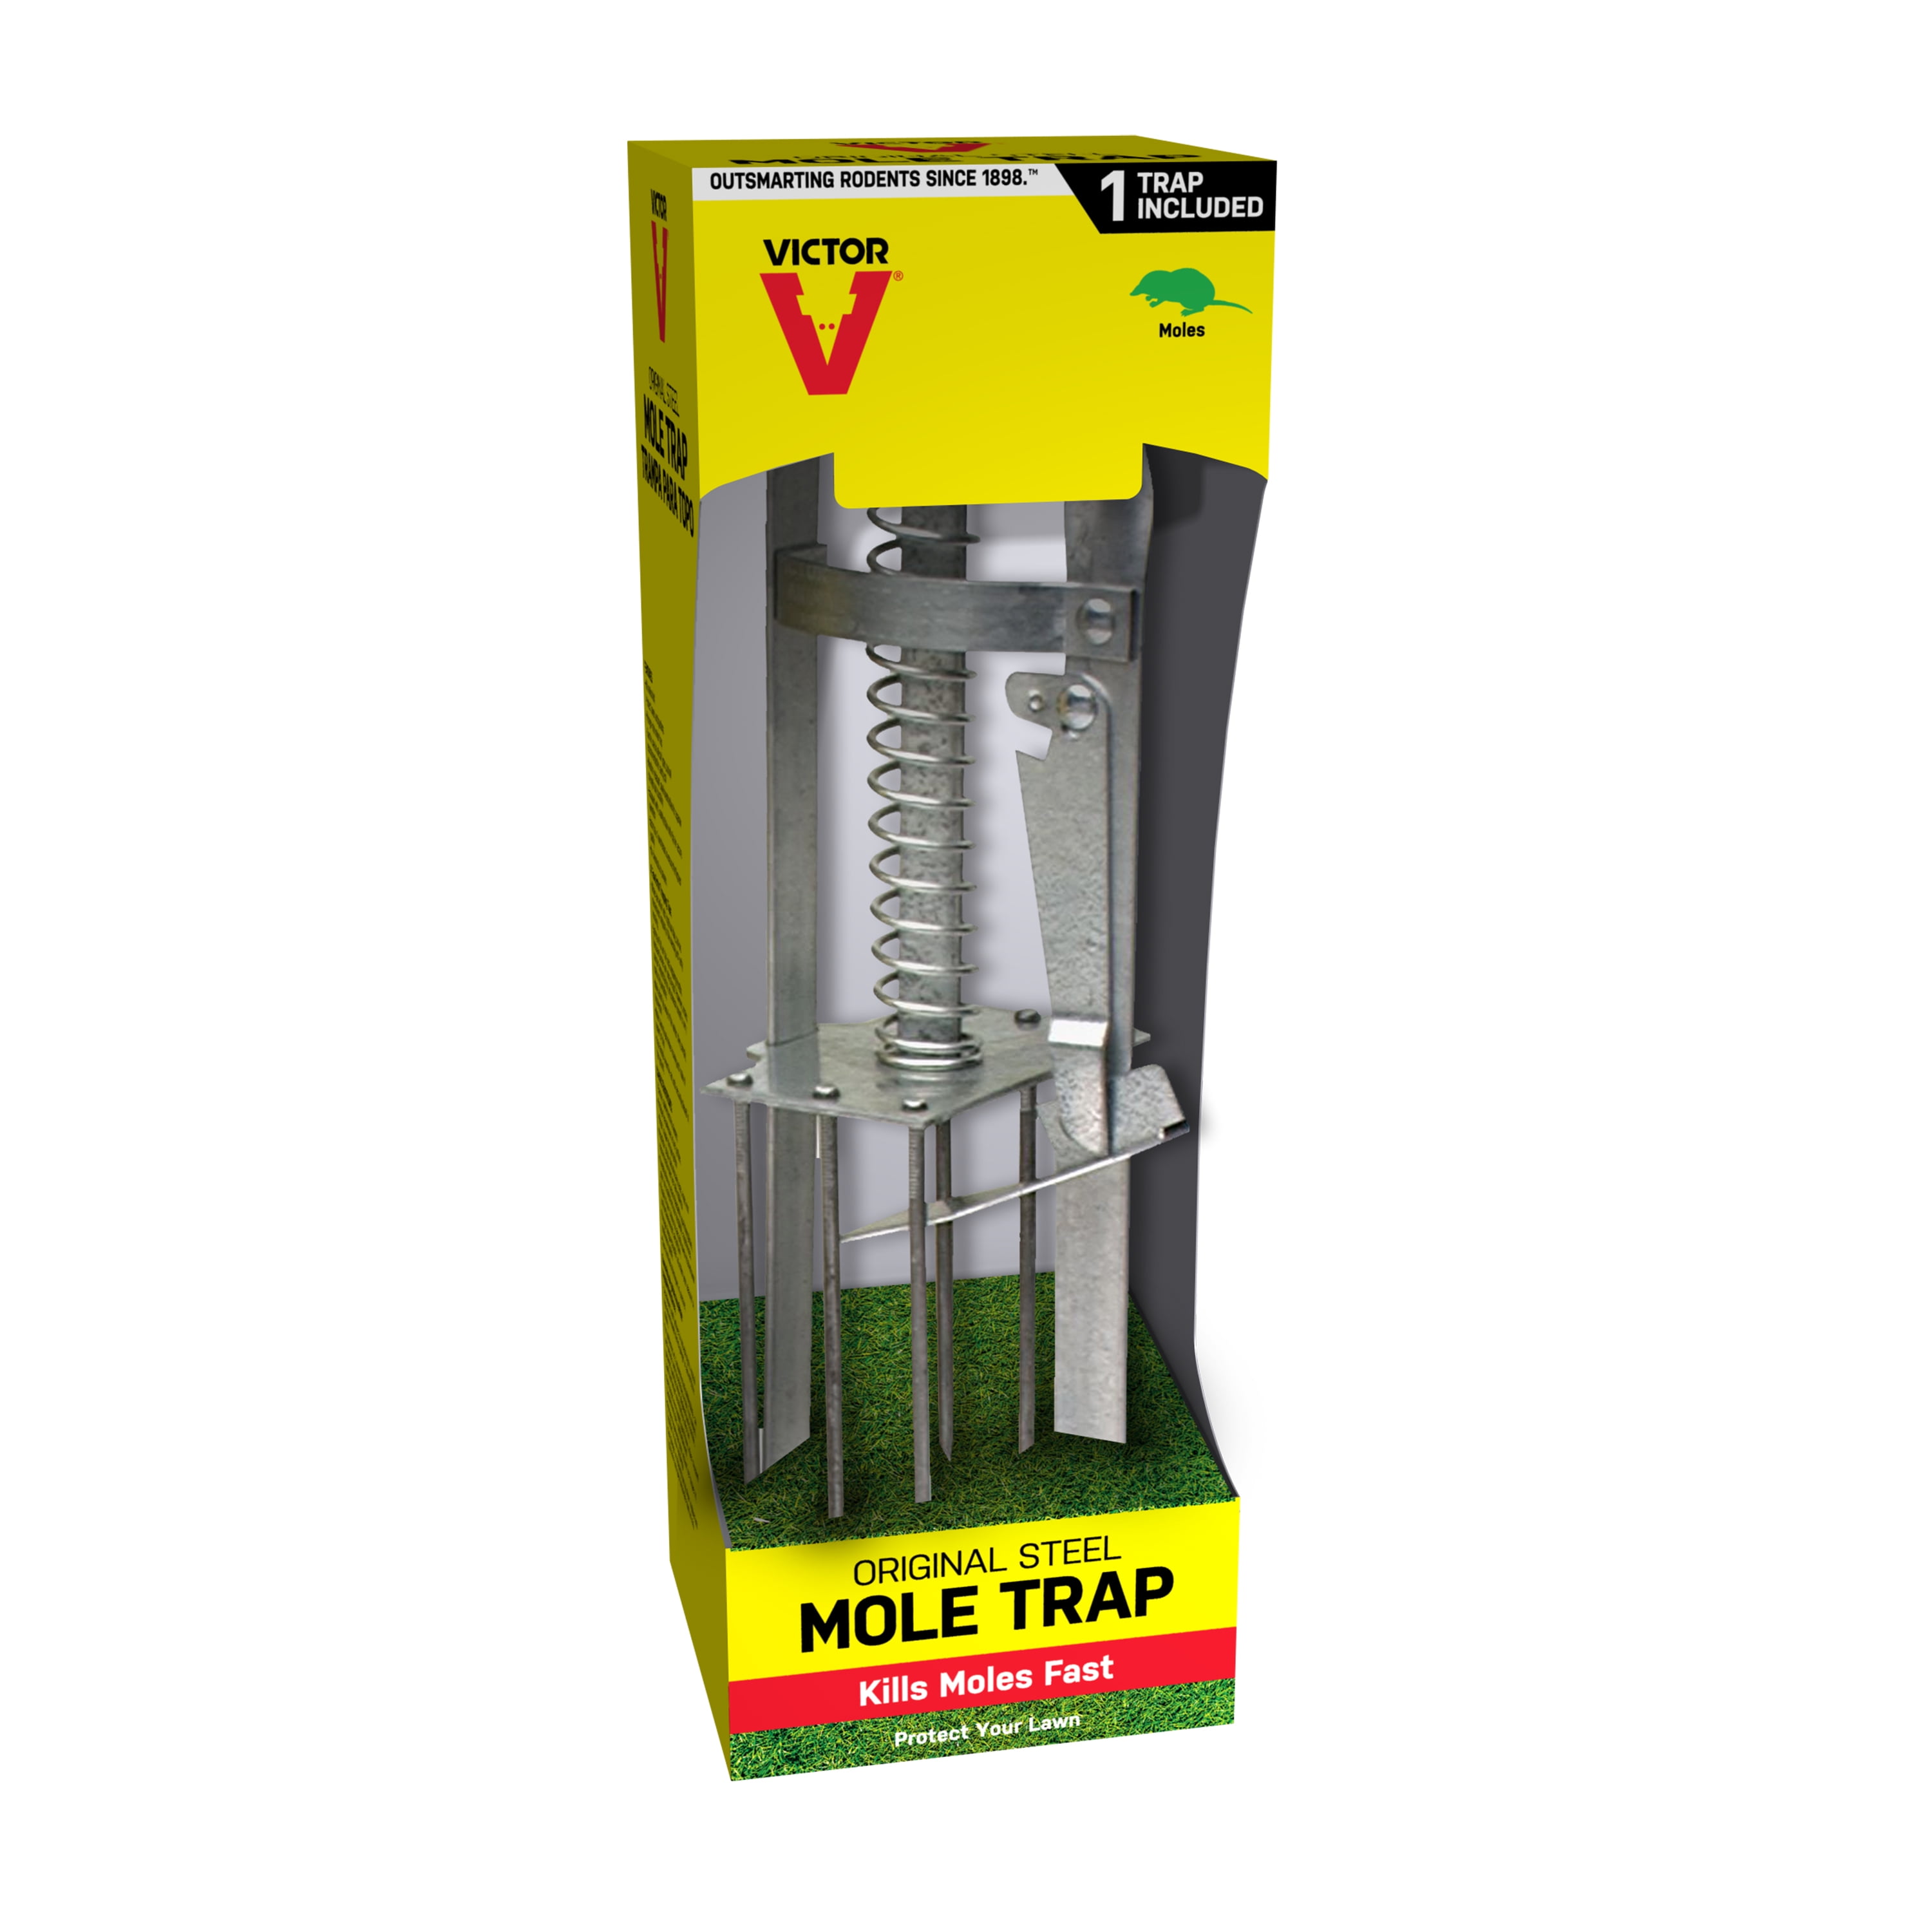 Victor Plunger Style Mole Trap For Quick and Clean Kill Garden Trapping Quick 